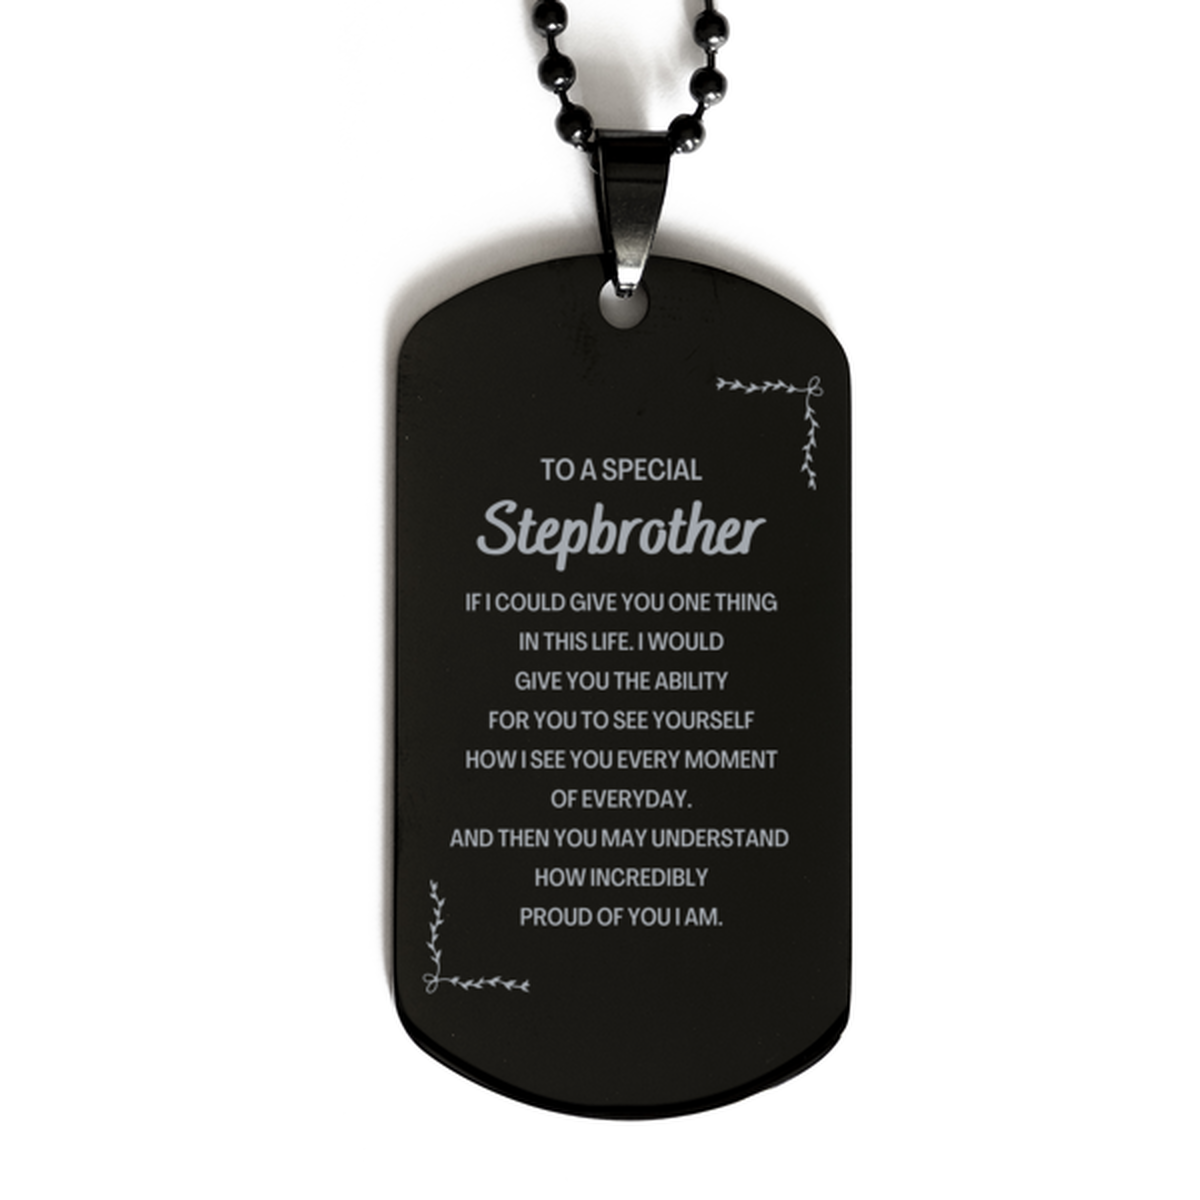 To My Stepbrother Black Dog Tag, Gifts For Stepbrother Engraved, Inspirational Gifts for Christmas Birthday, Epic Gifts for Stepbrother To A Special Stepbrother how incredibly proud of you I am